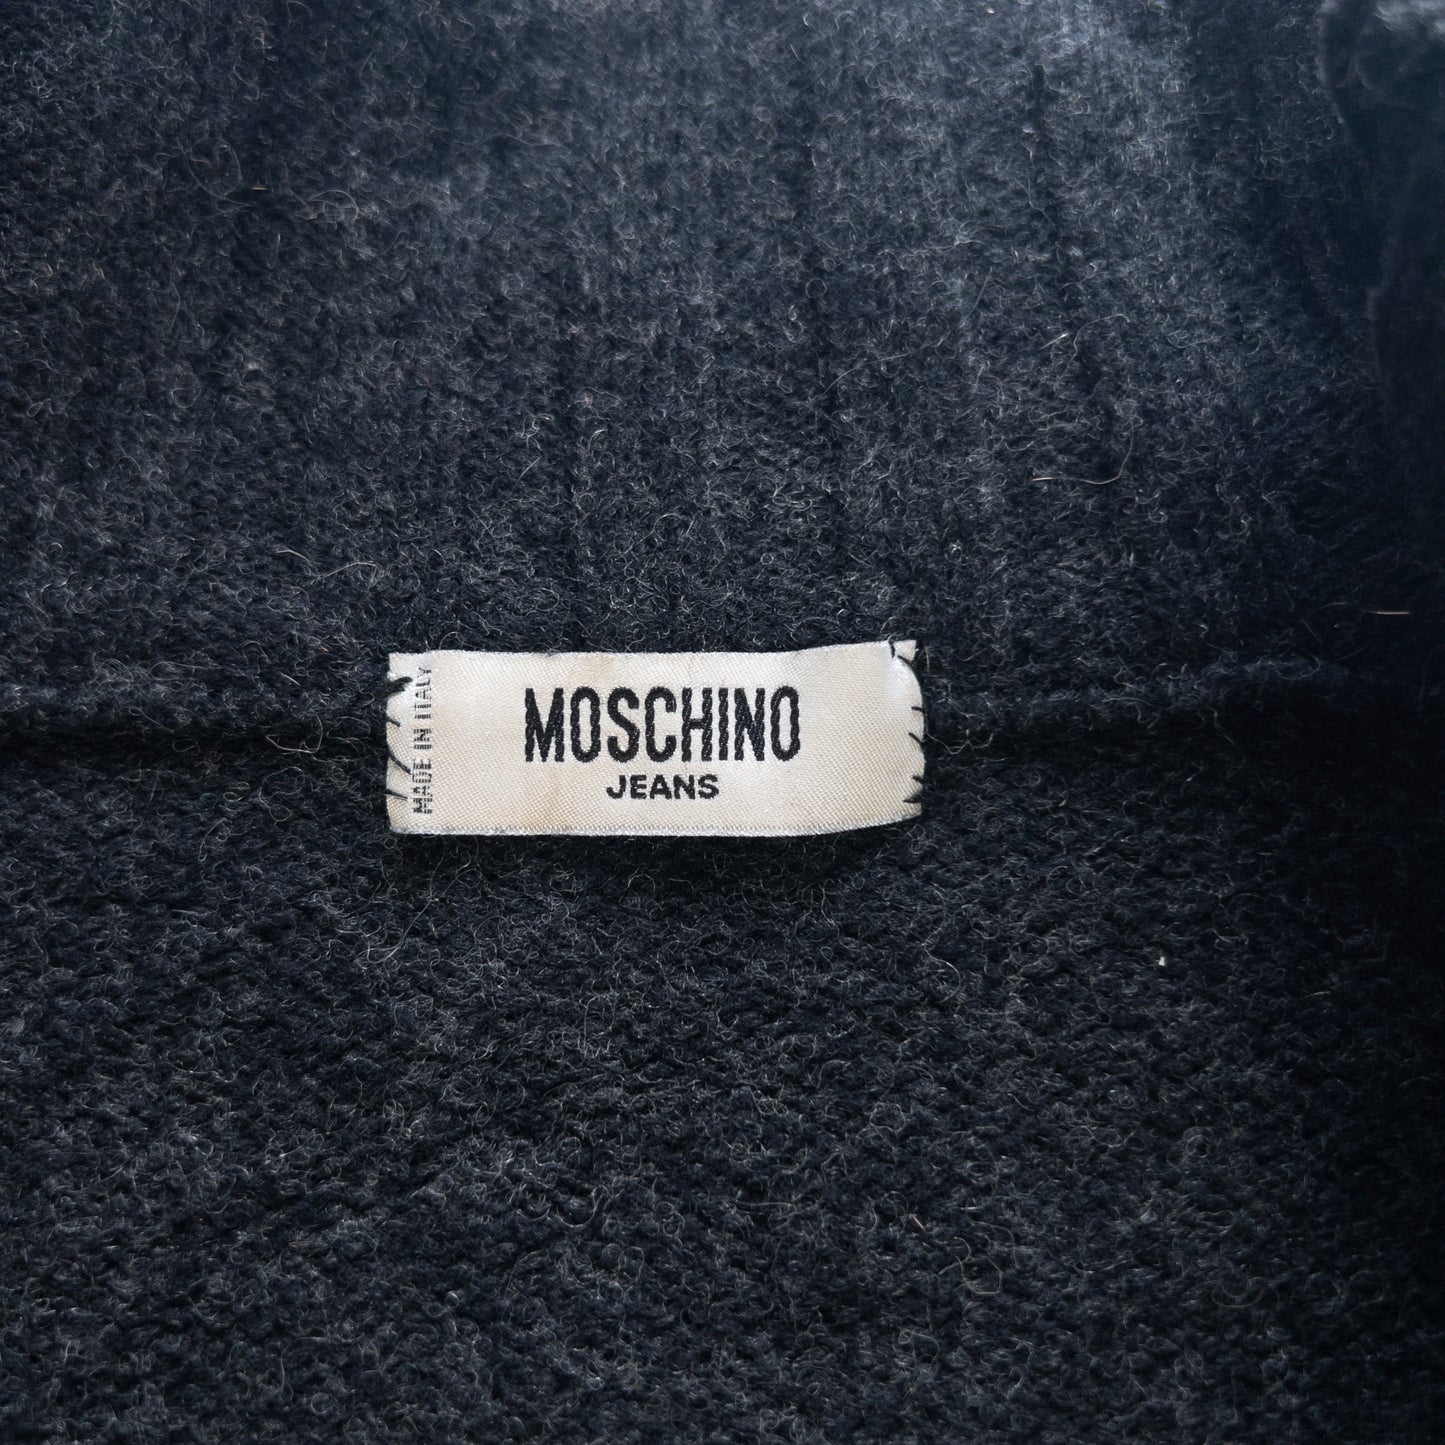 Vintage Moschino Jeans Knit Zip Up Jumper Size L